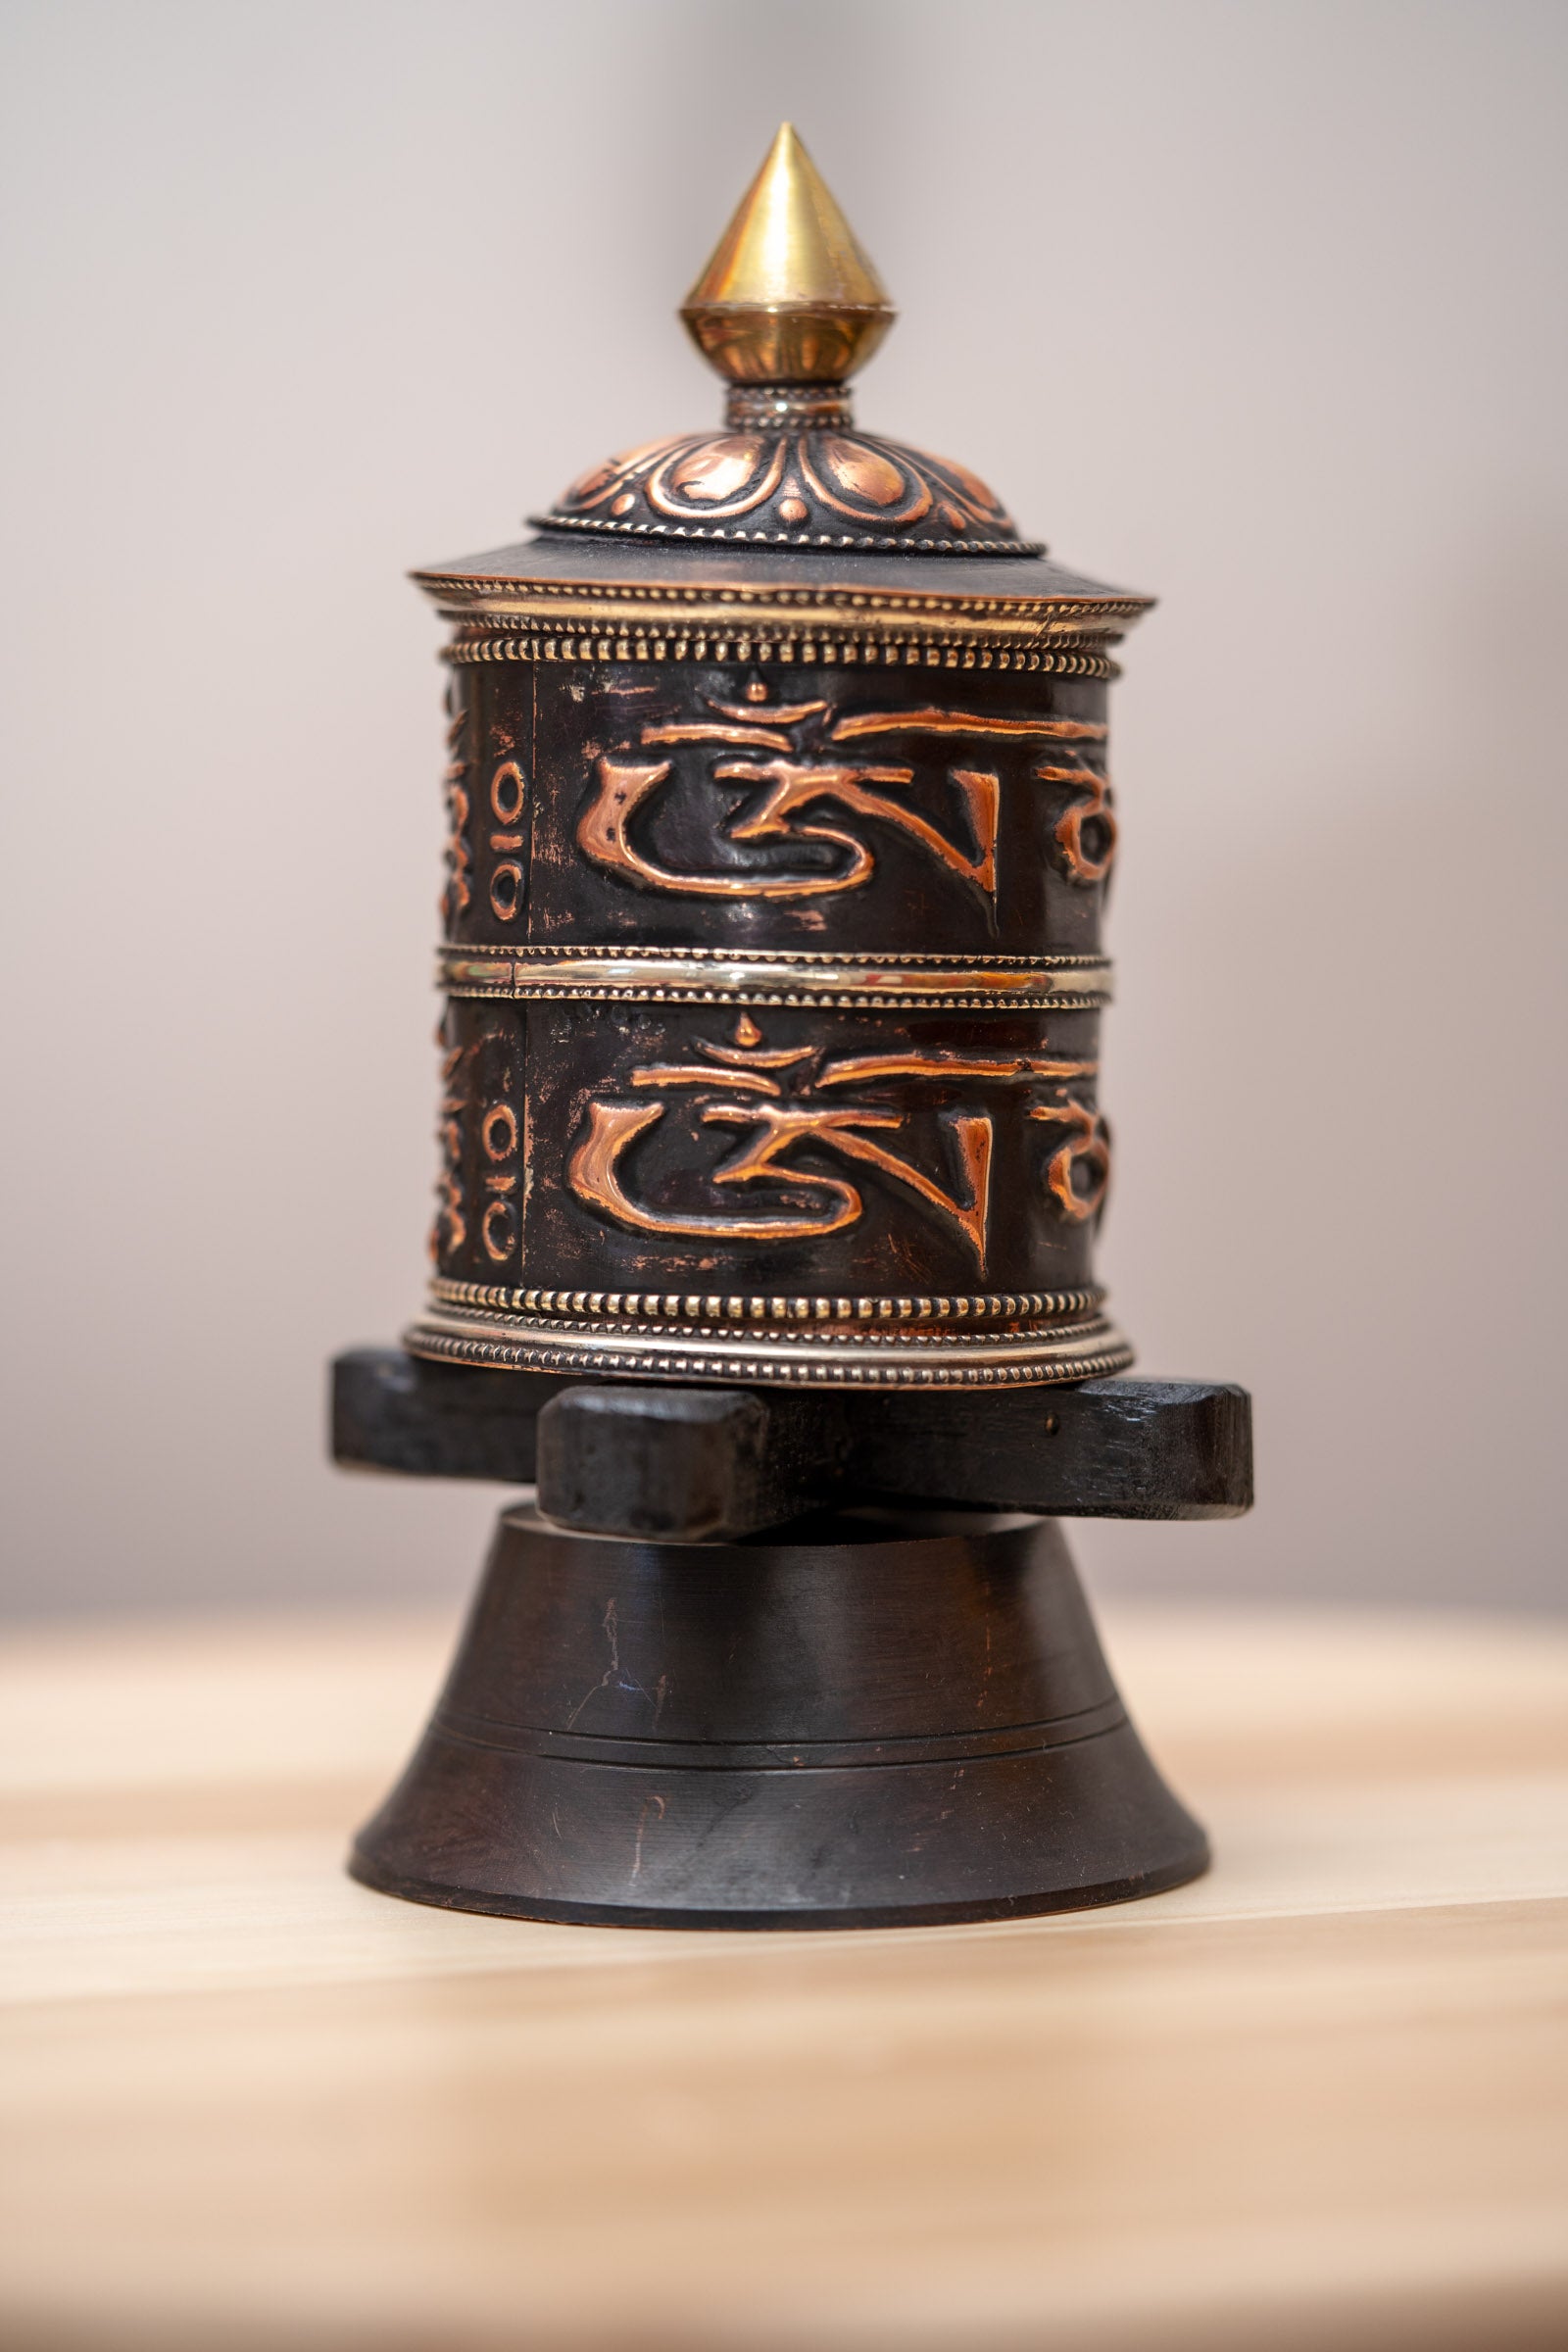 Mantra Prayer Wheel encourages spiritual wellbeing on physical, mental, and emotional levels.